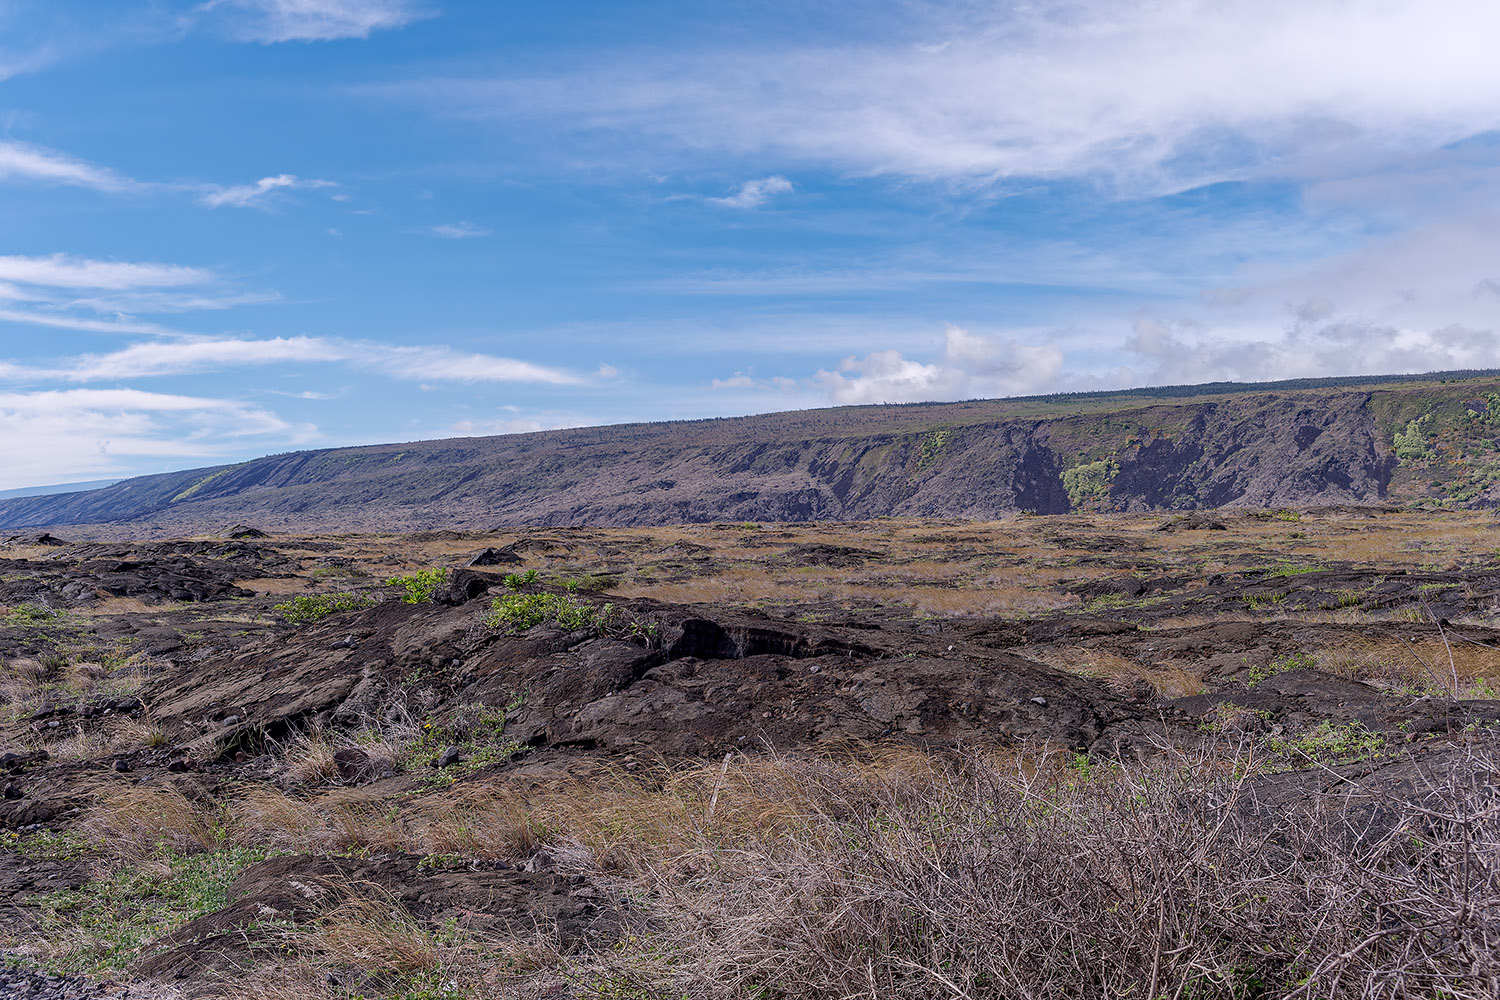 ...but years after a lava flow, the landscape is still pretty barren.